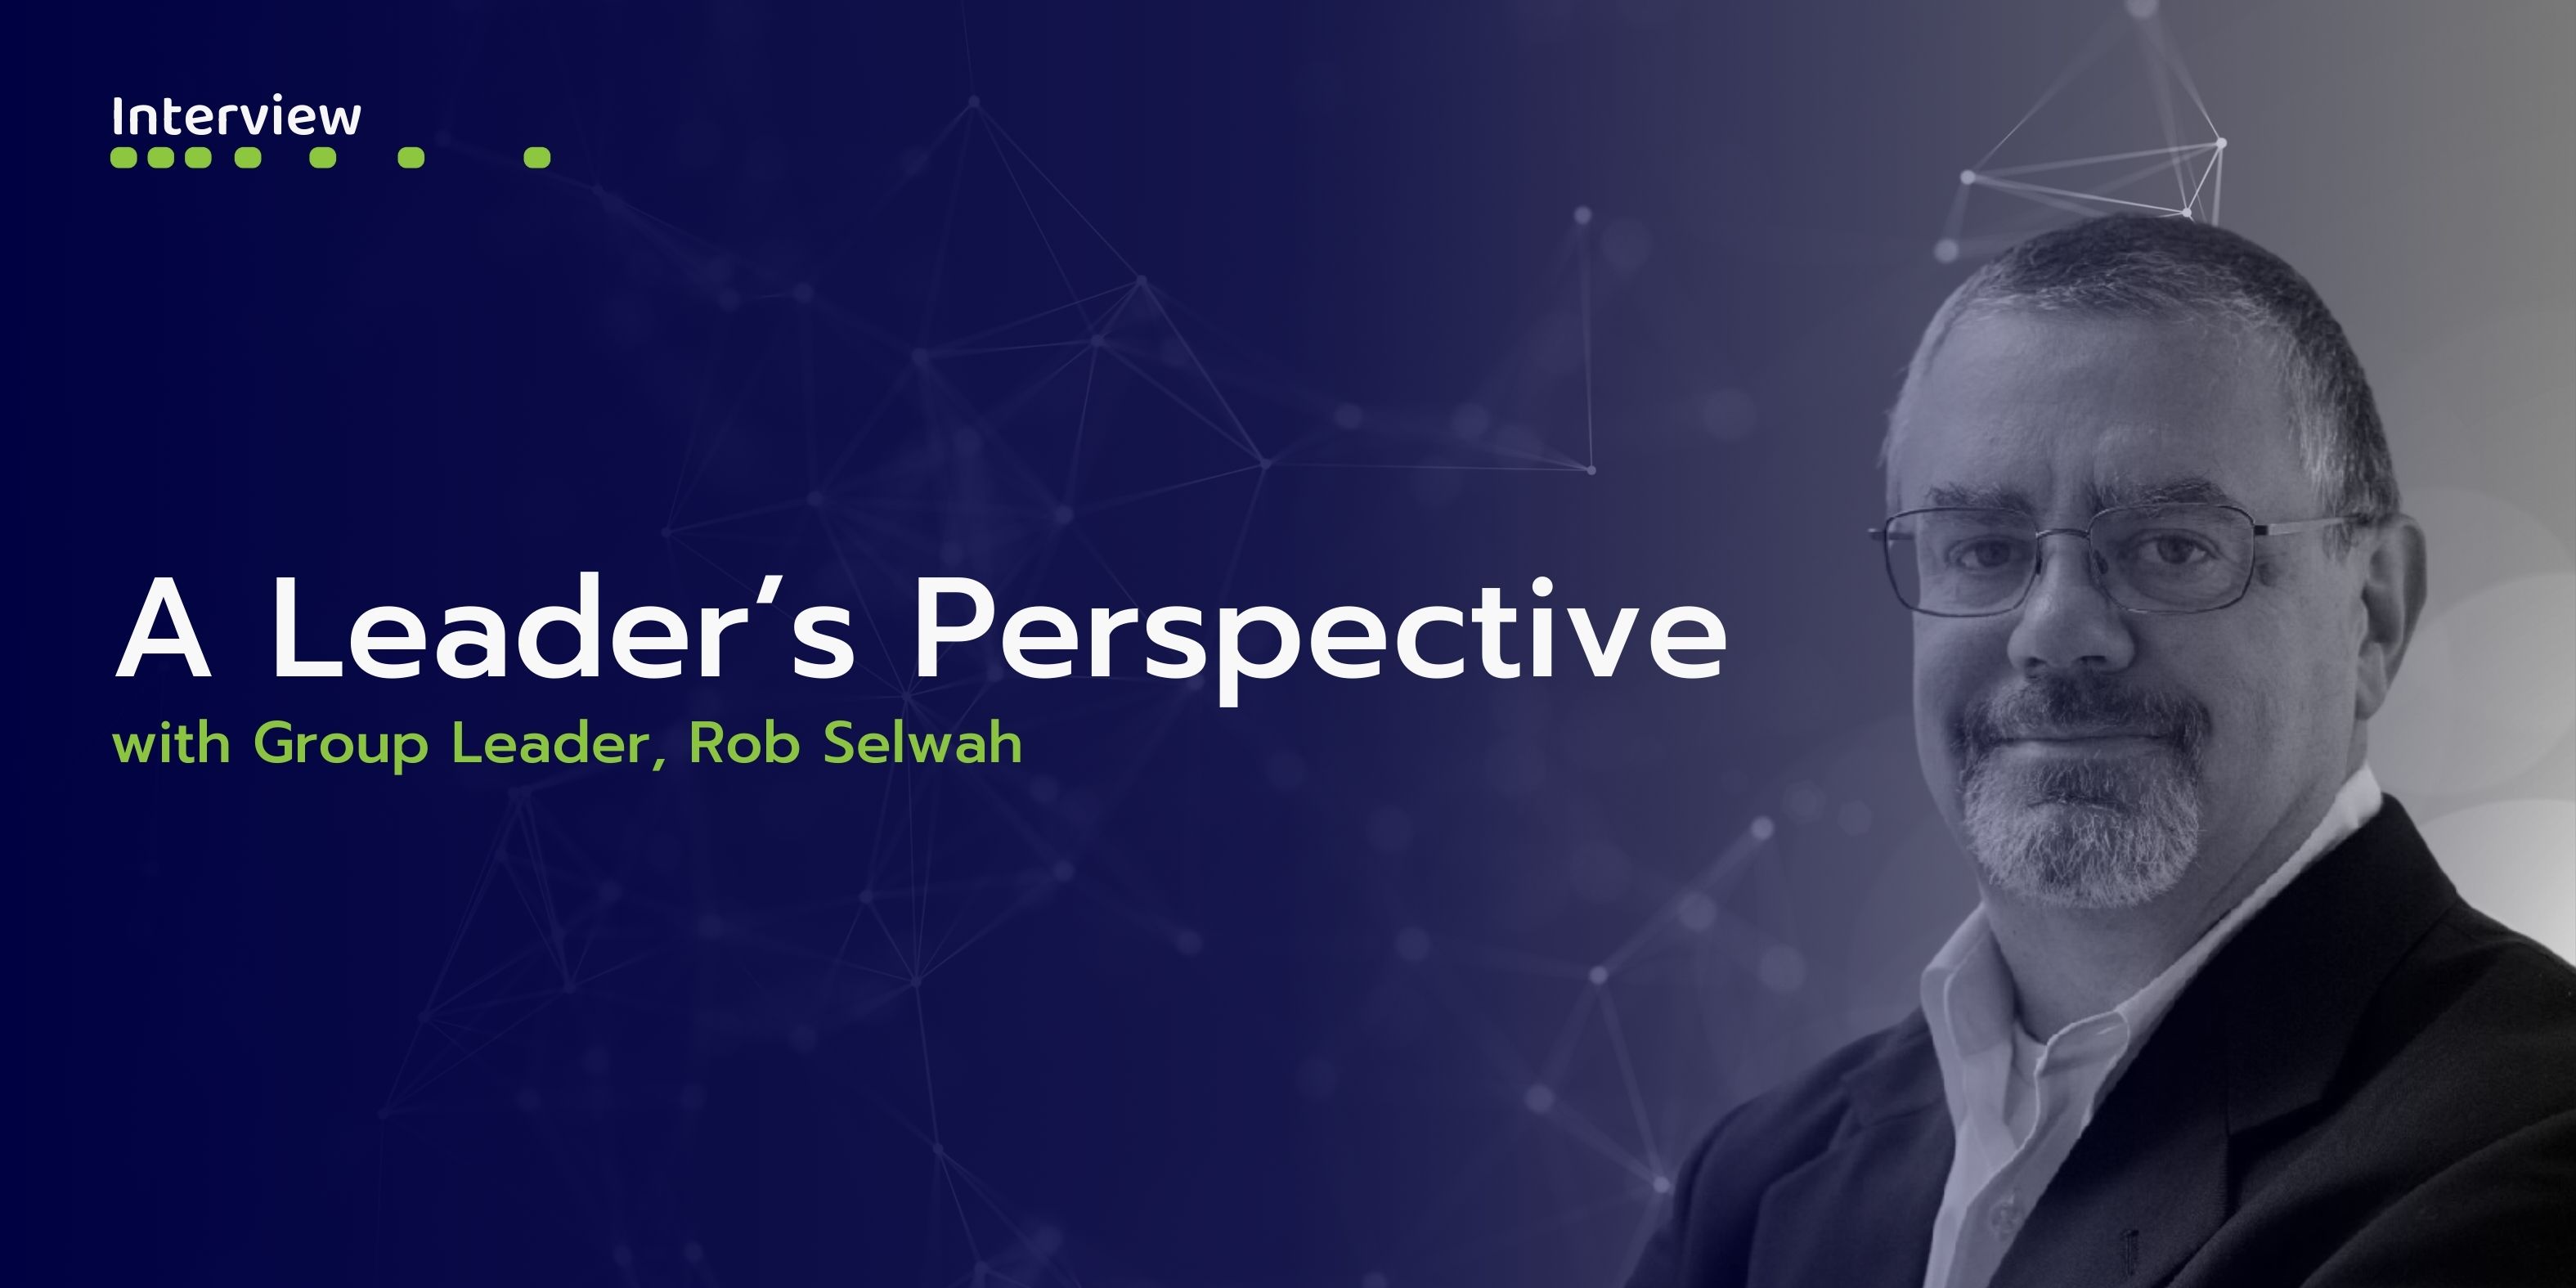 A Leader's Perspective with Group Leader Rob Selwah